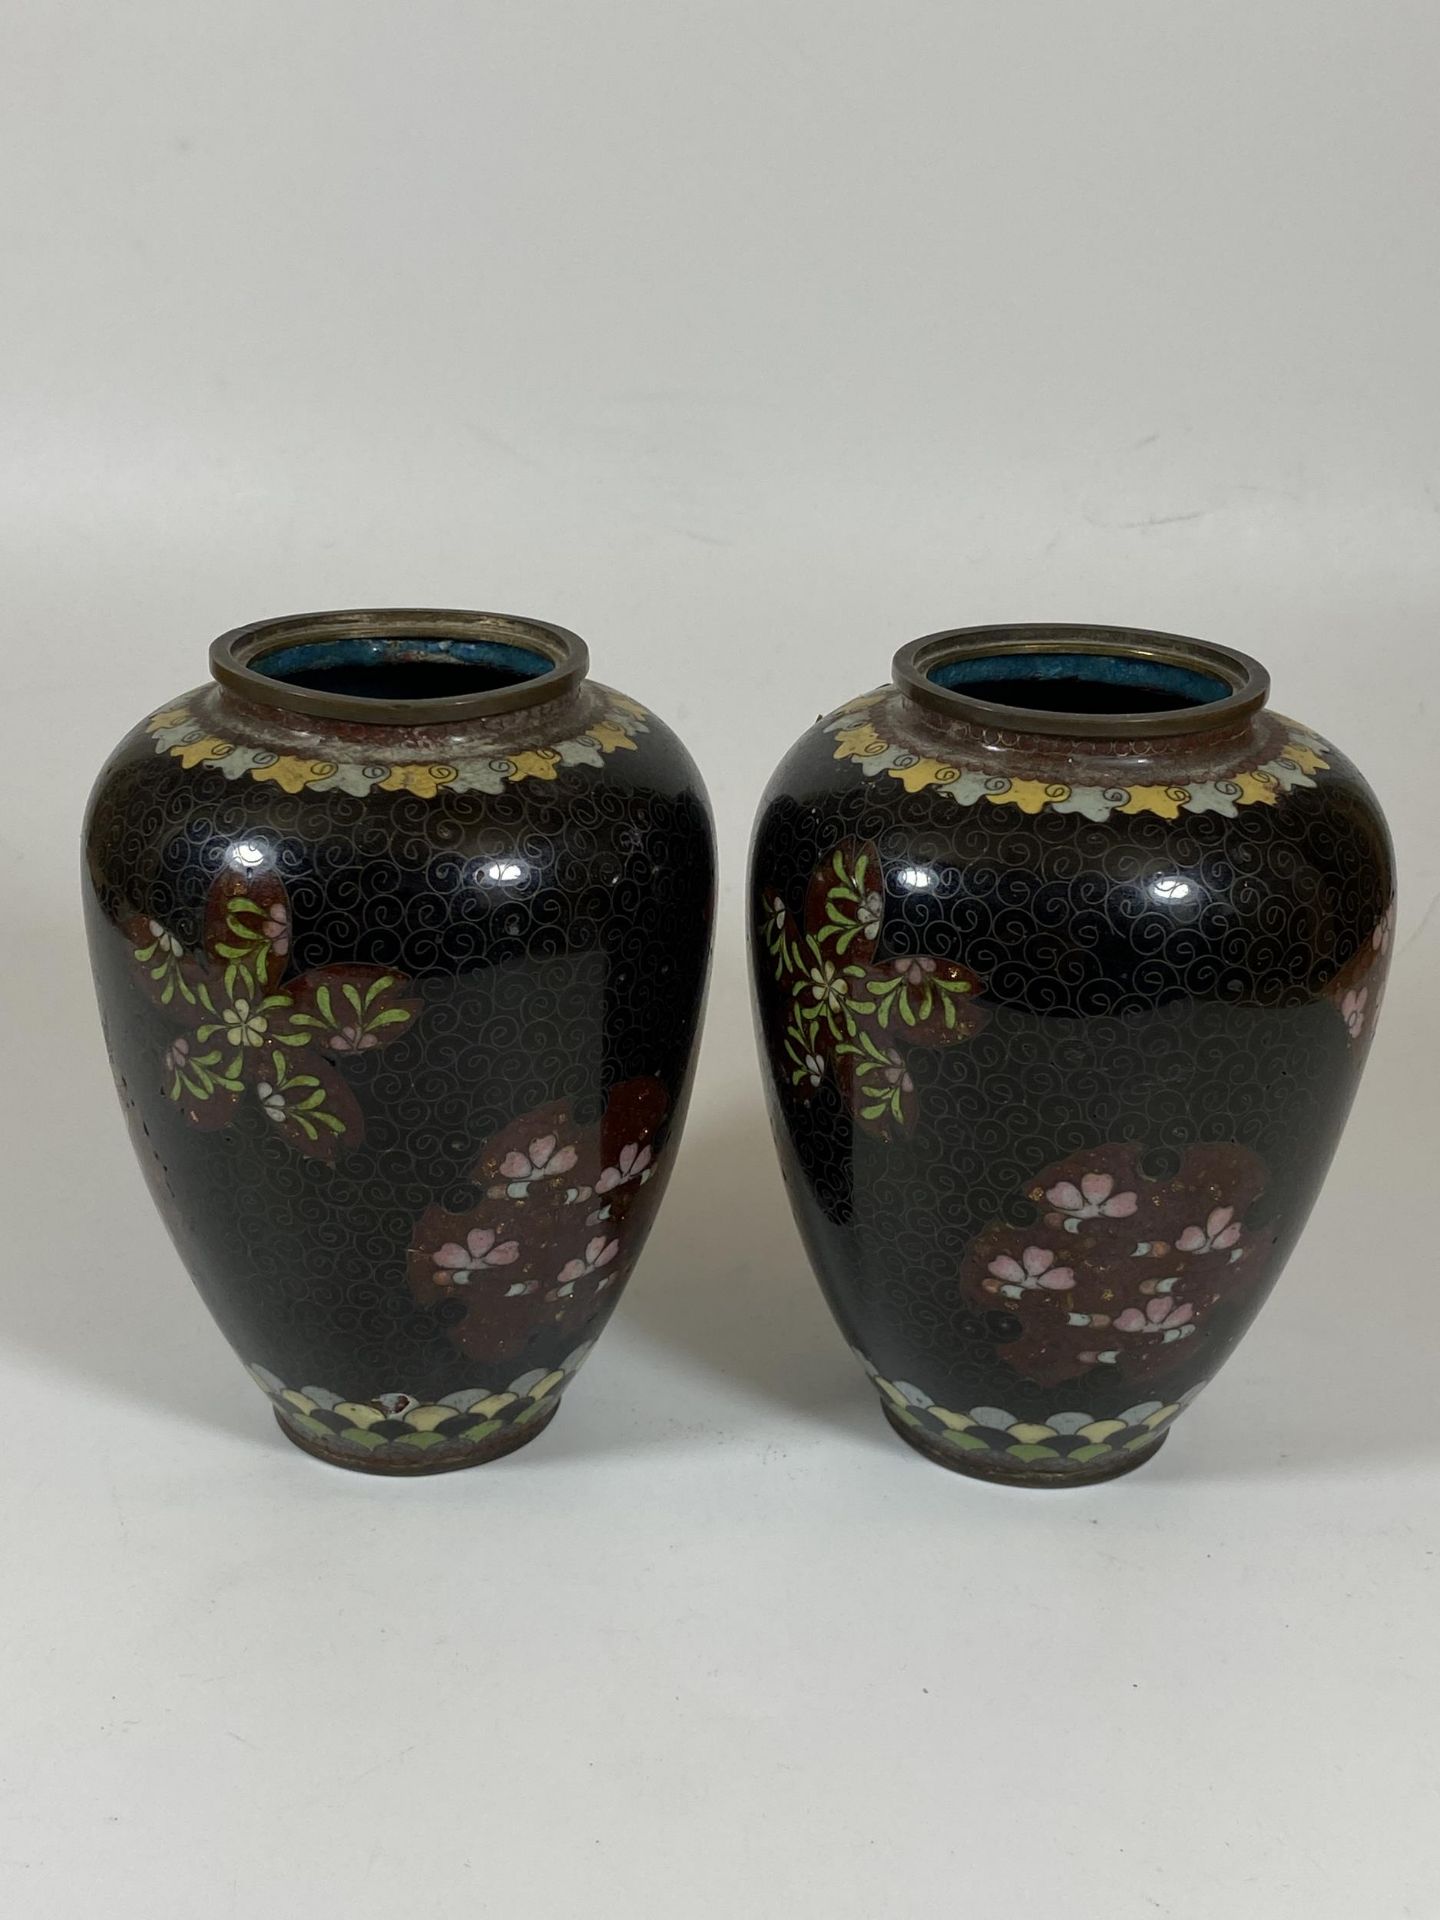 A PAIR OF JAPANESE MEIJI PERIOD (1868-1912) BIRD AND FLORAL DESIGN CLOISONNE OVOID FORM VASES, - Image 2 of 4